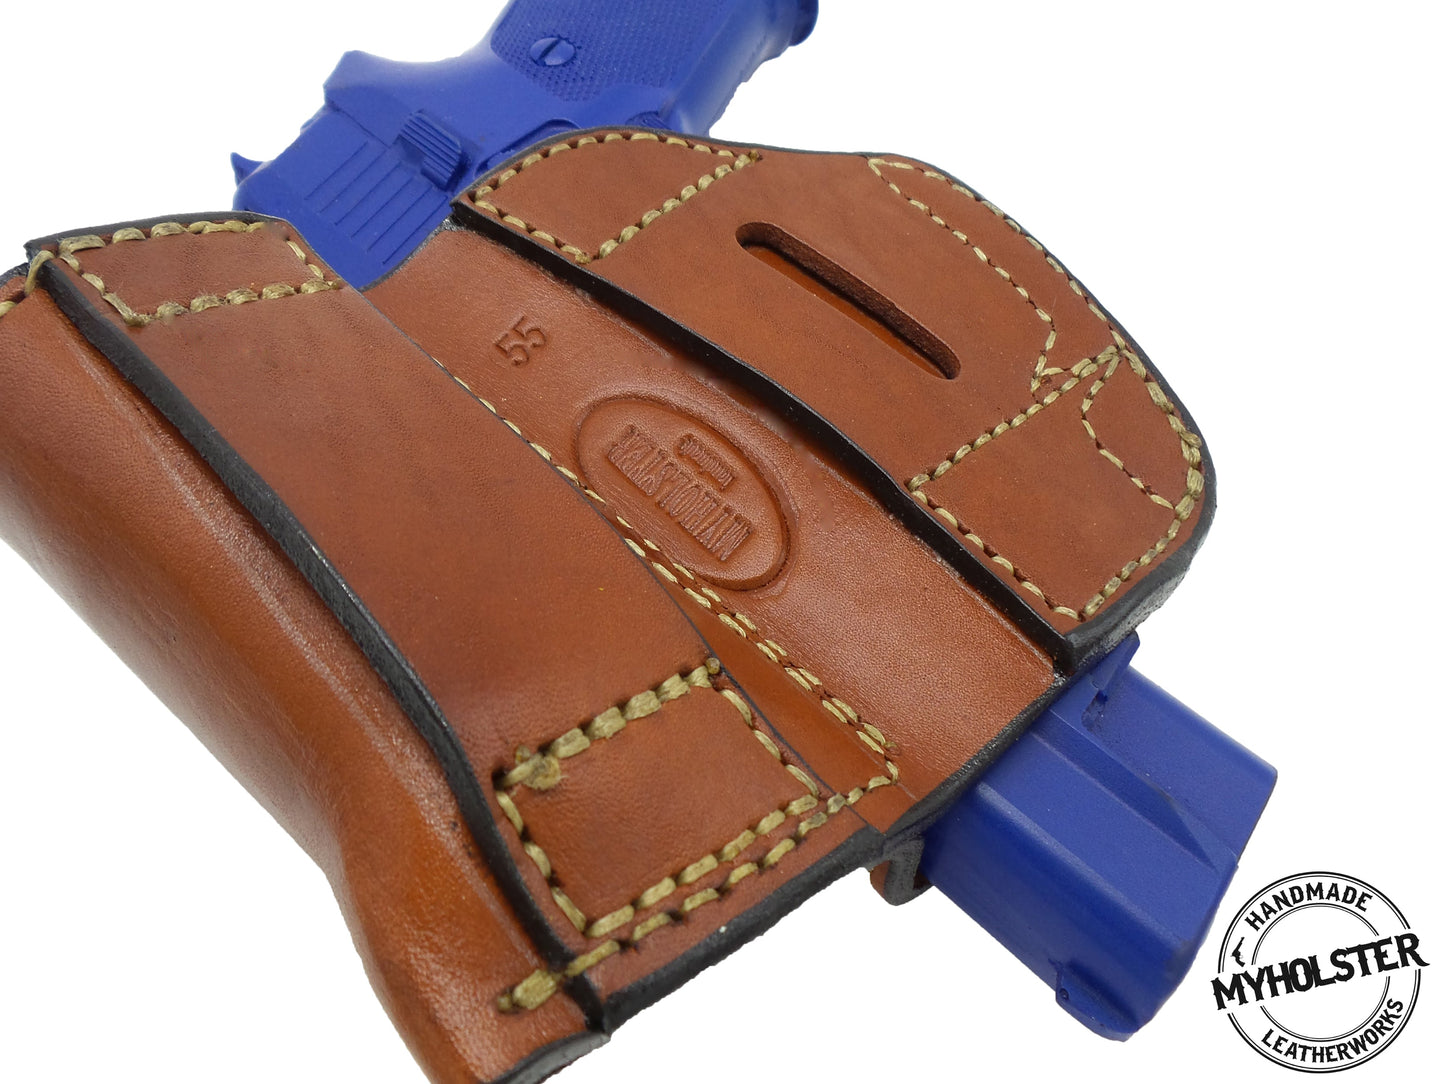 BUL ARMORY 1911 GOVERNMENT OWB Belt Holster with Mag Pouch Leather Holster